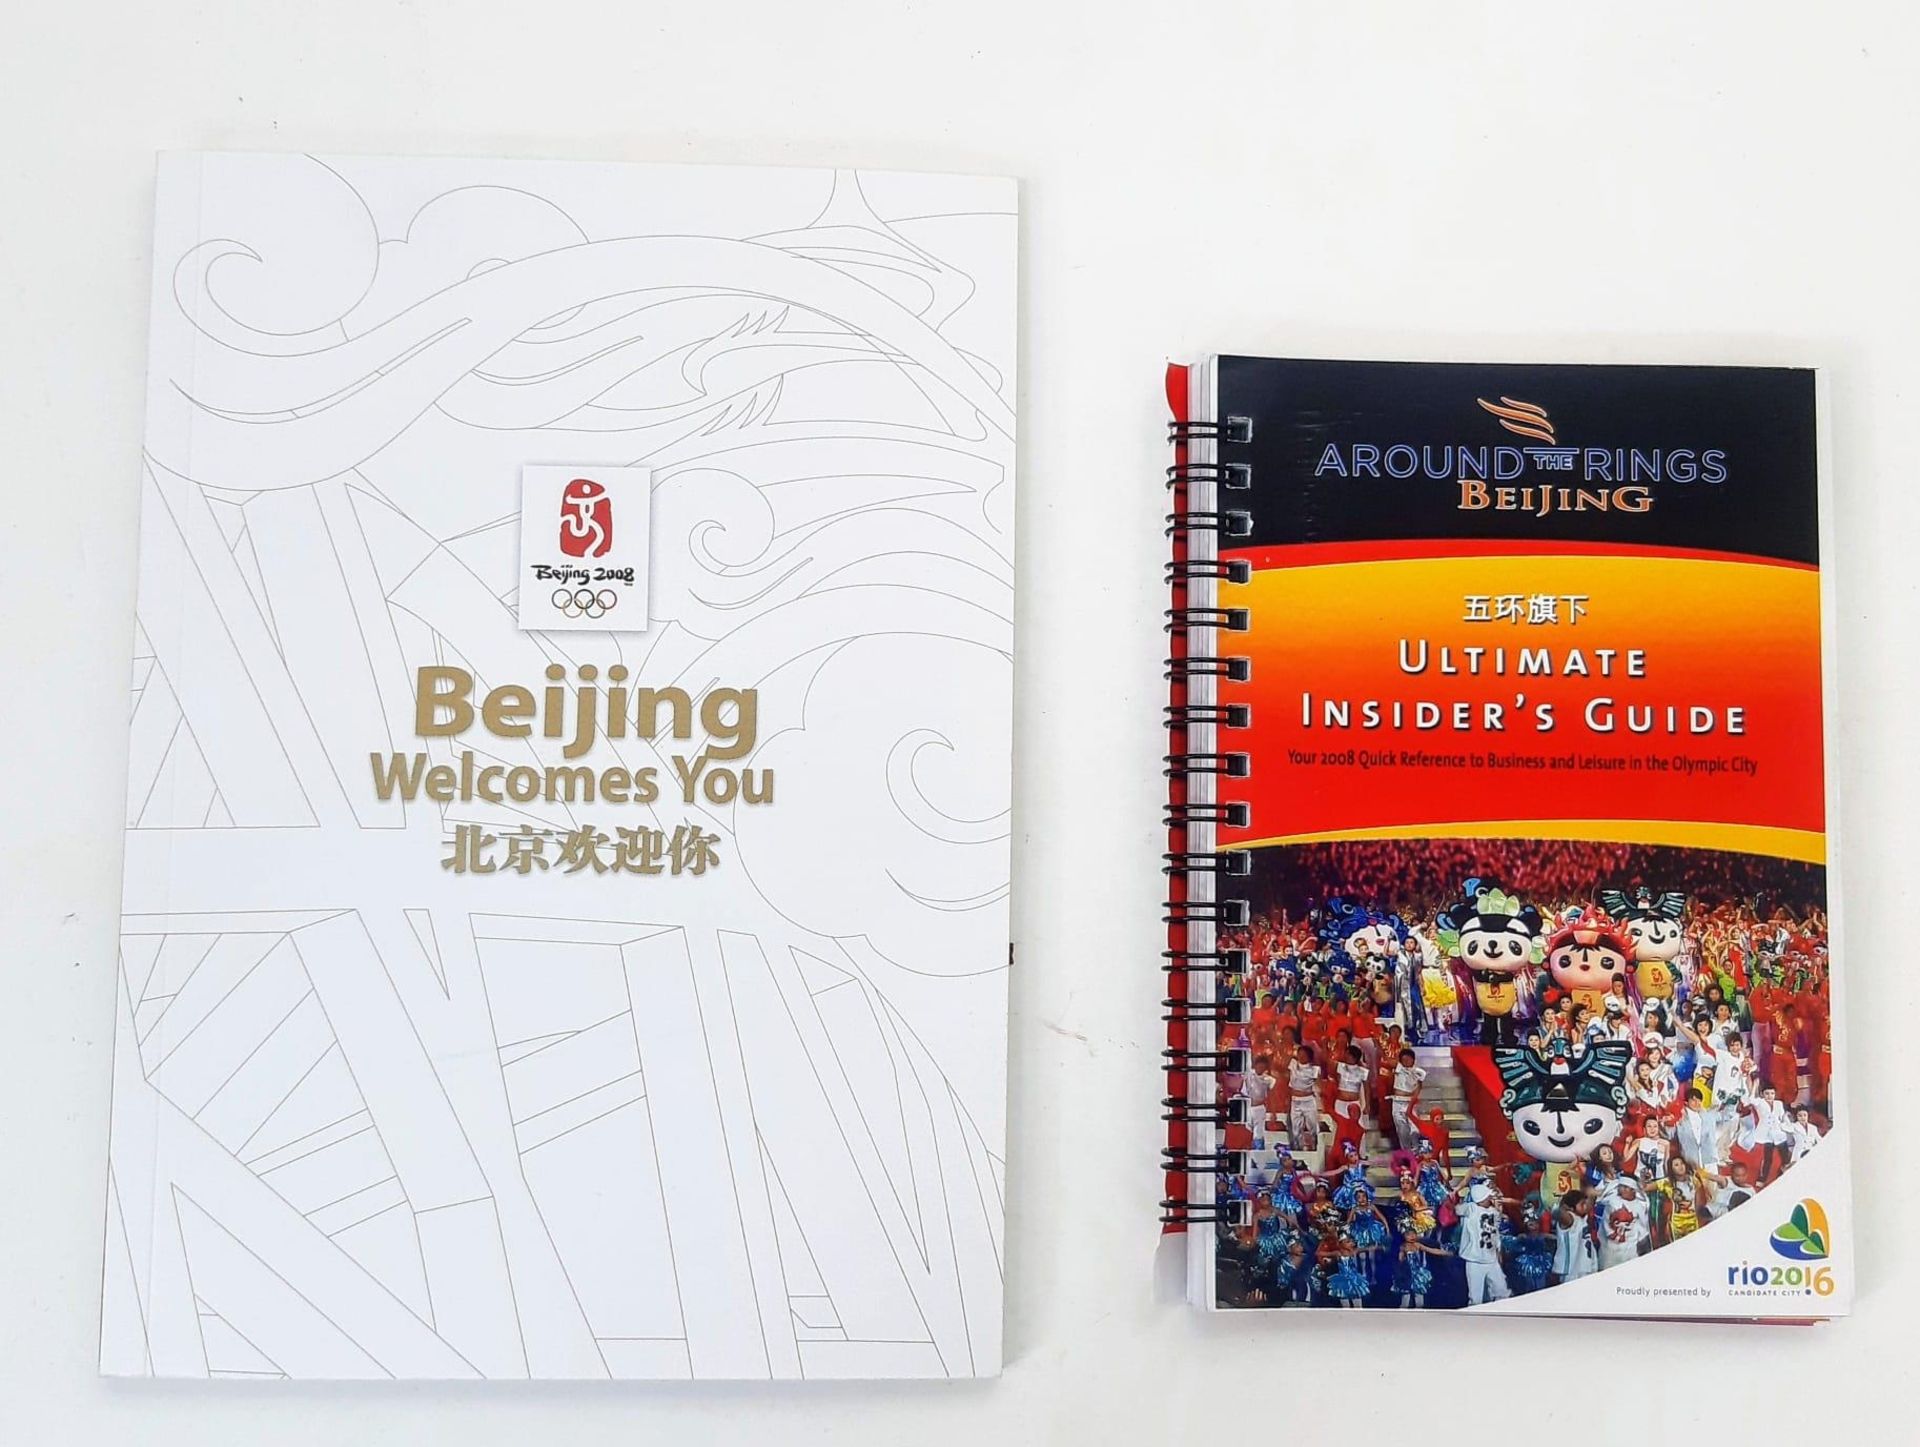 A Beijing 2008 Olympics Press/Media Pack. Includes tickets, brochures and other collectibles. - Image 8 of 12